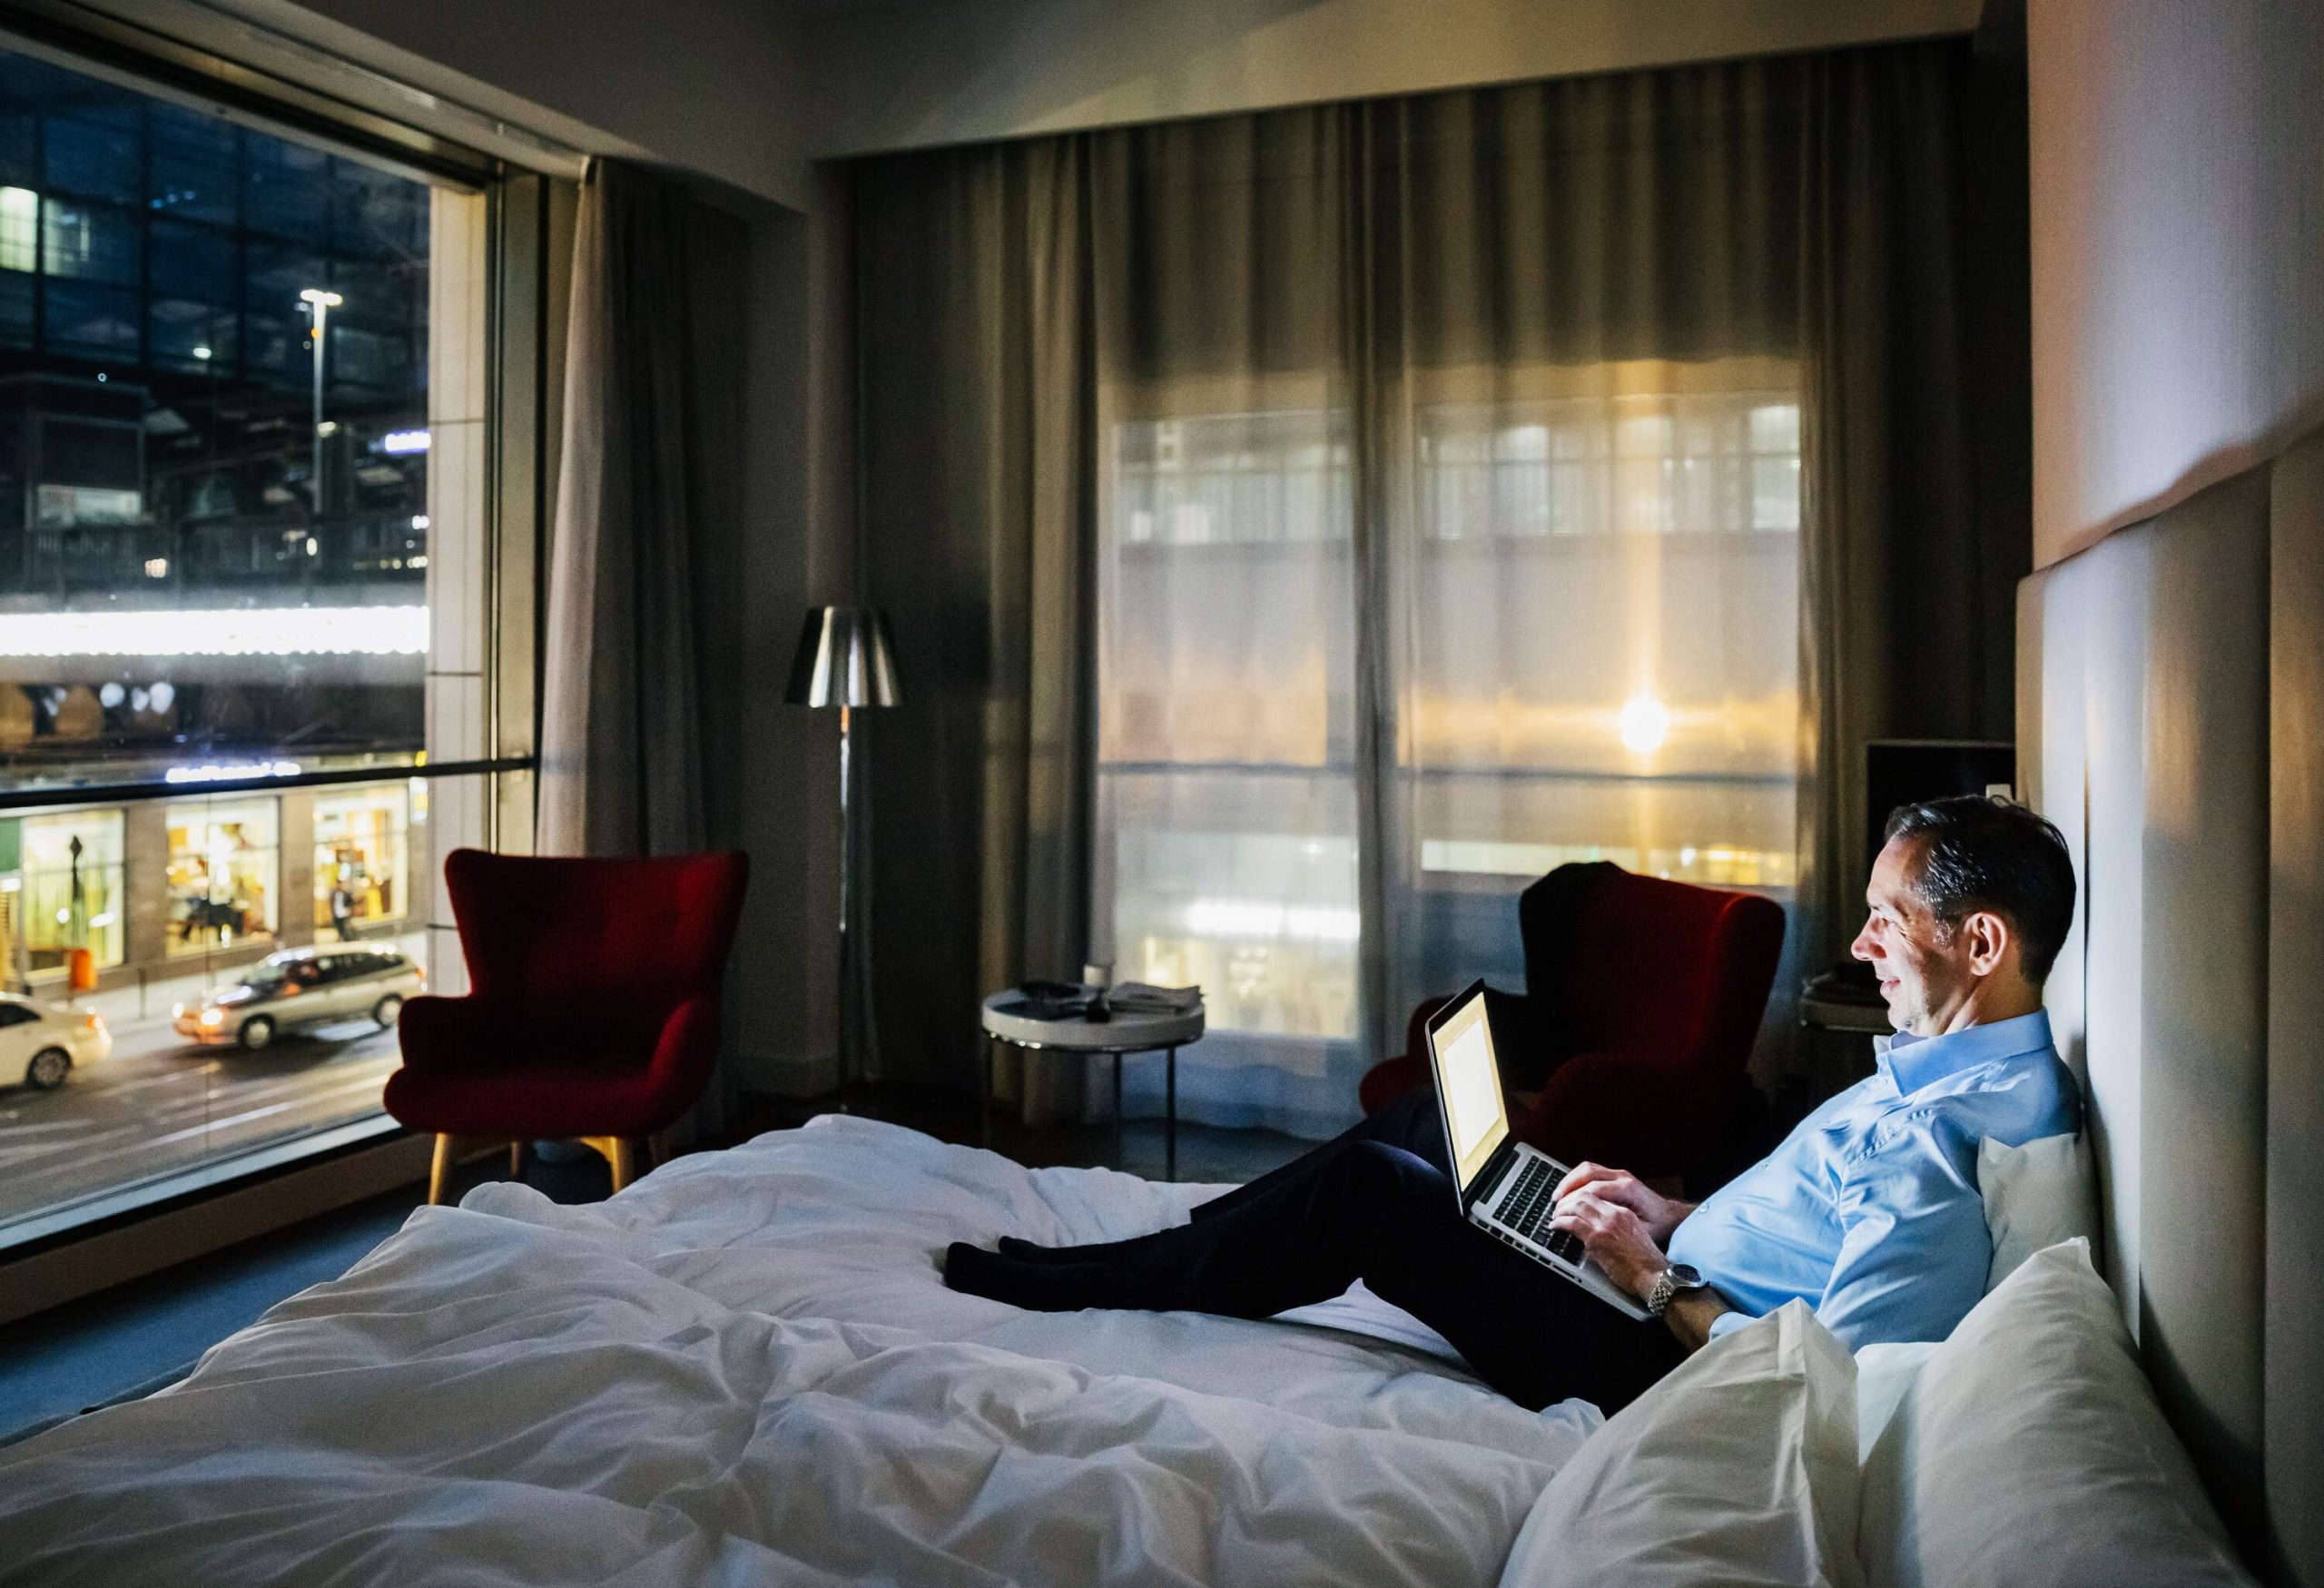 dest_germany_berlin_hotel_room_bed_person_man_male_businessman_laptop_gettyimages-689008376